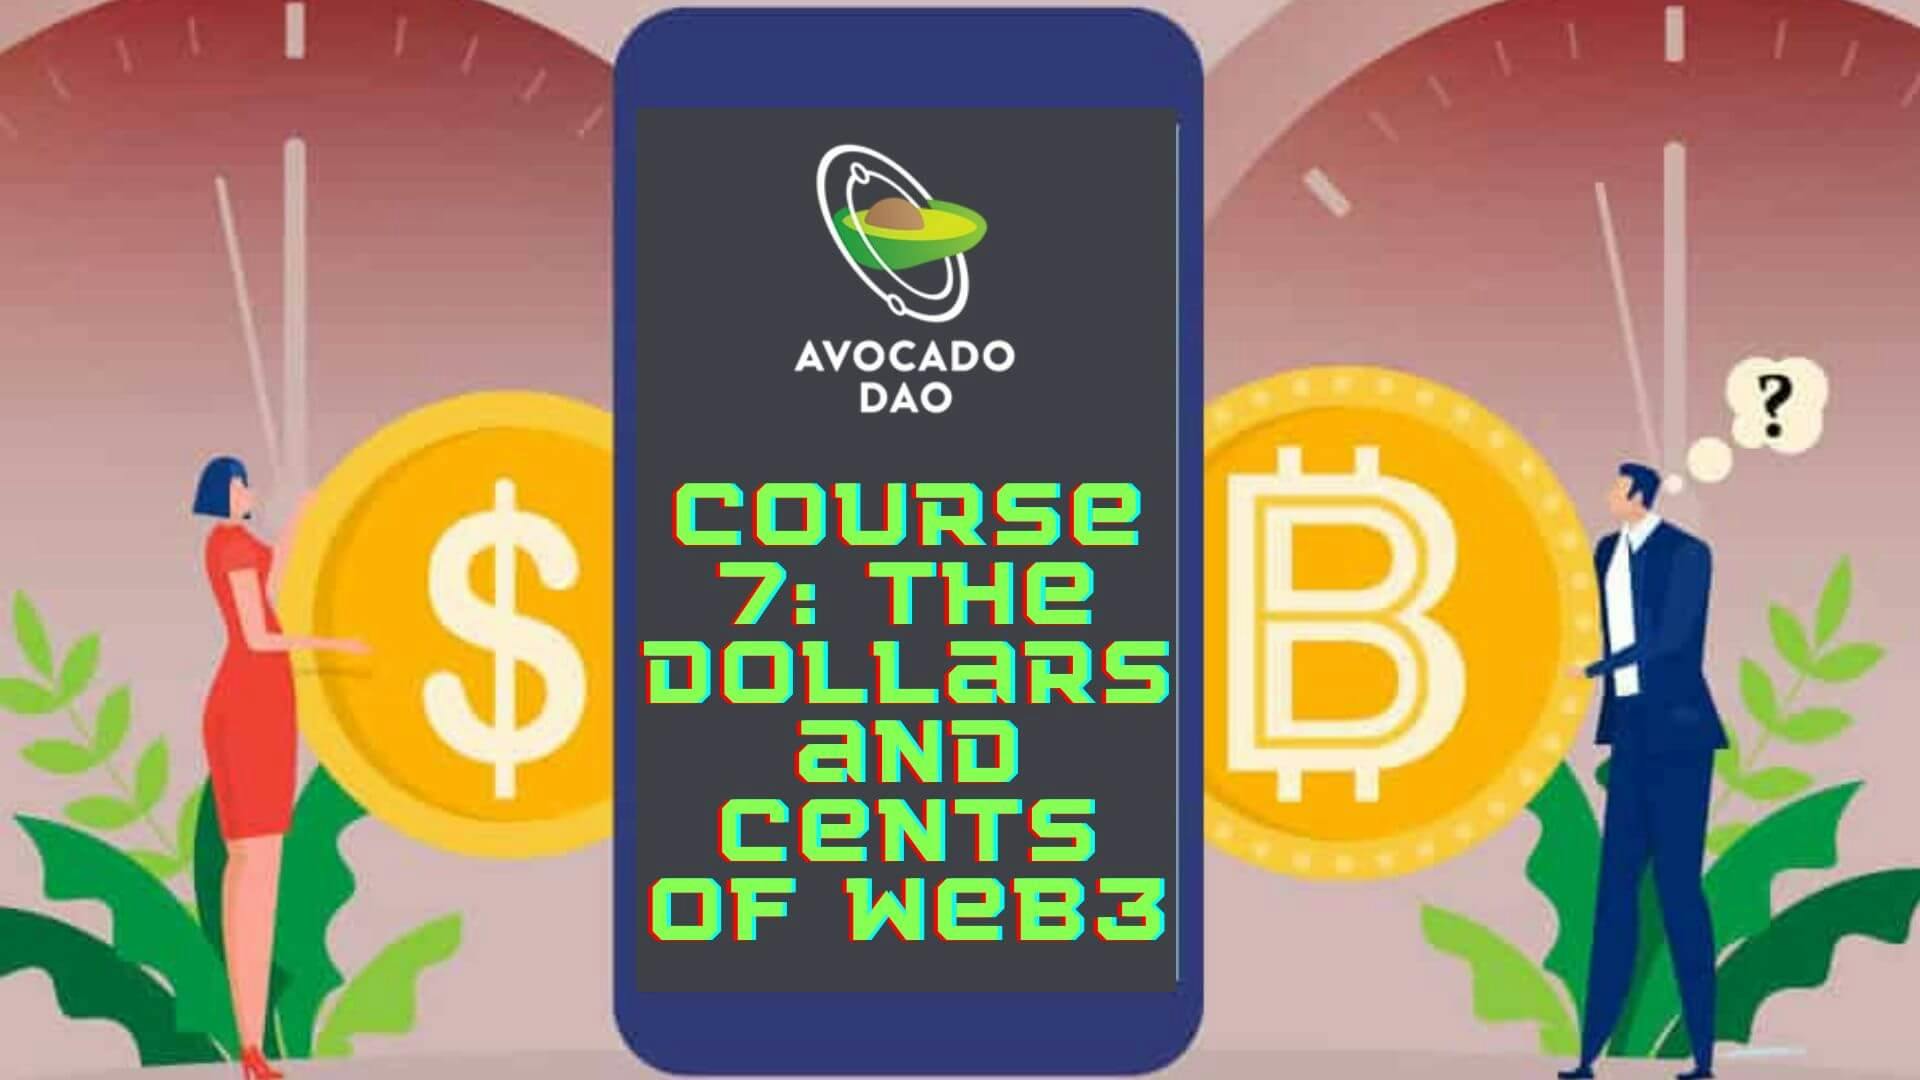 Web3 L&E Course #7: The dollars and cents of Web3